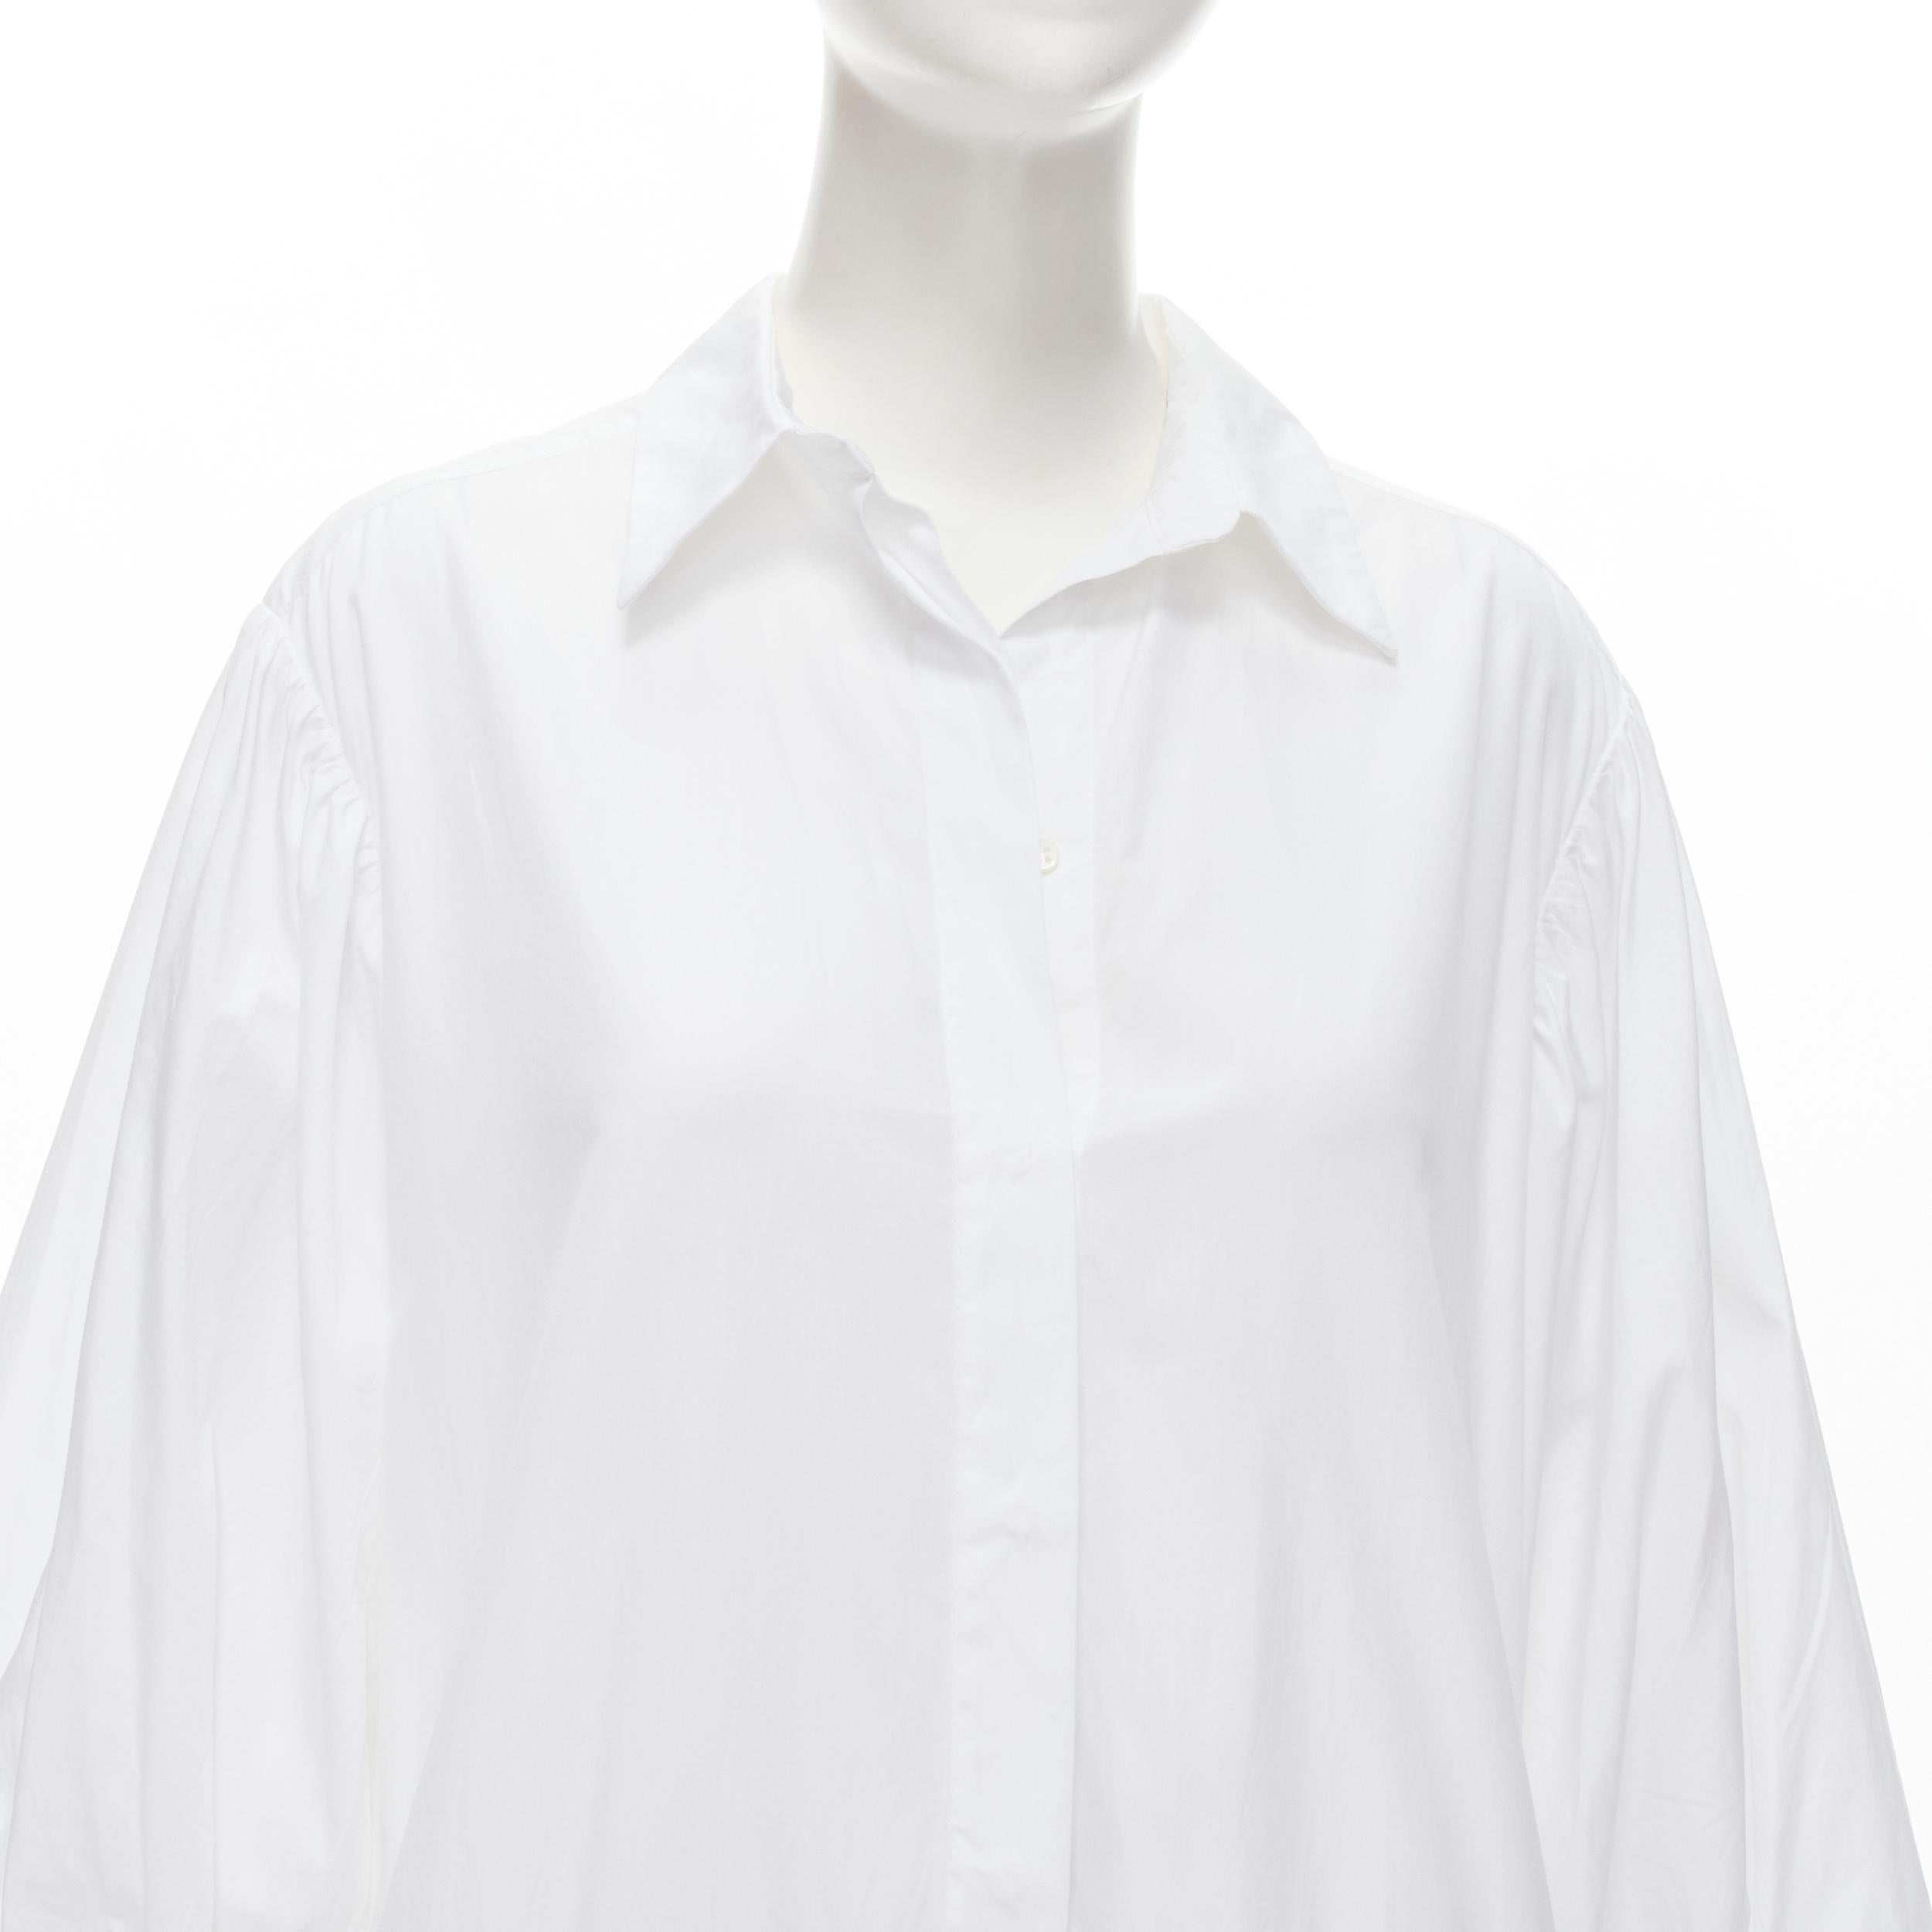 CECILIE BAHNSEN Amy white cotton poplin tiered shirred flared moumou dress UK6 S In Excellent Condition For Sale In Hong Kong, NT